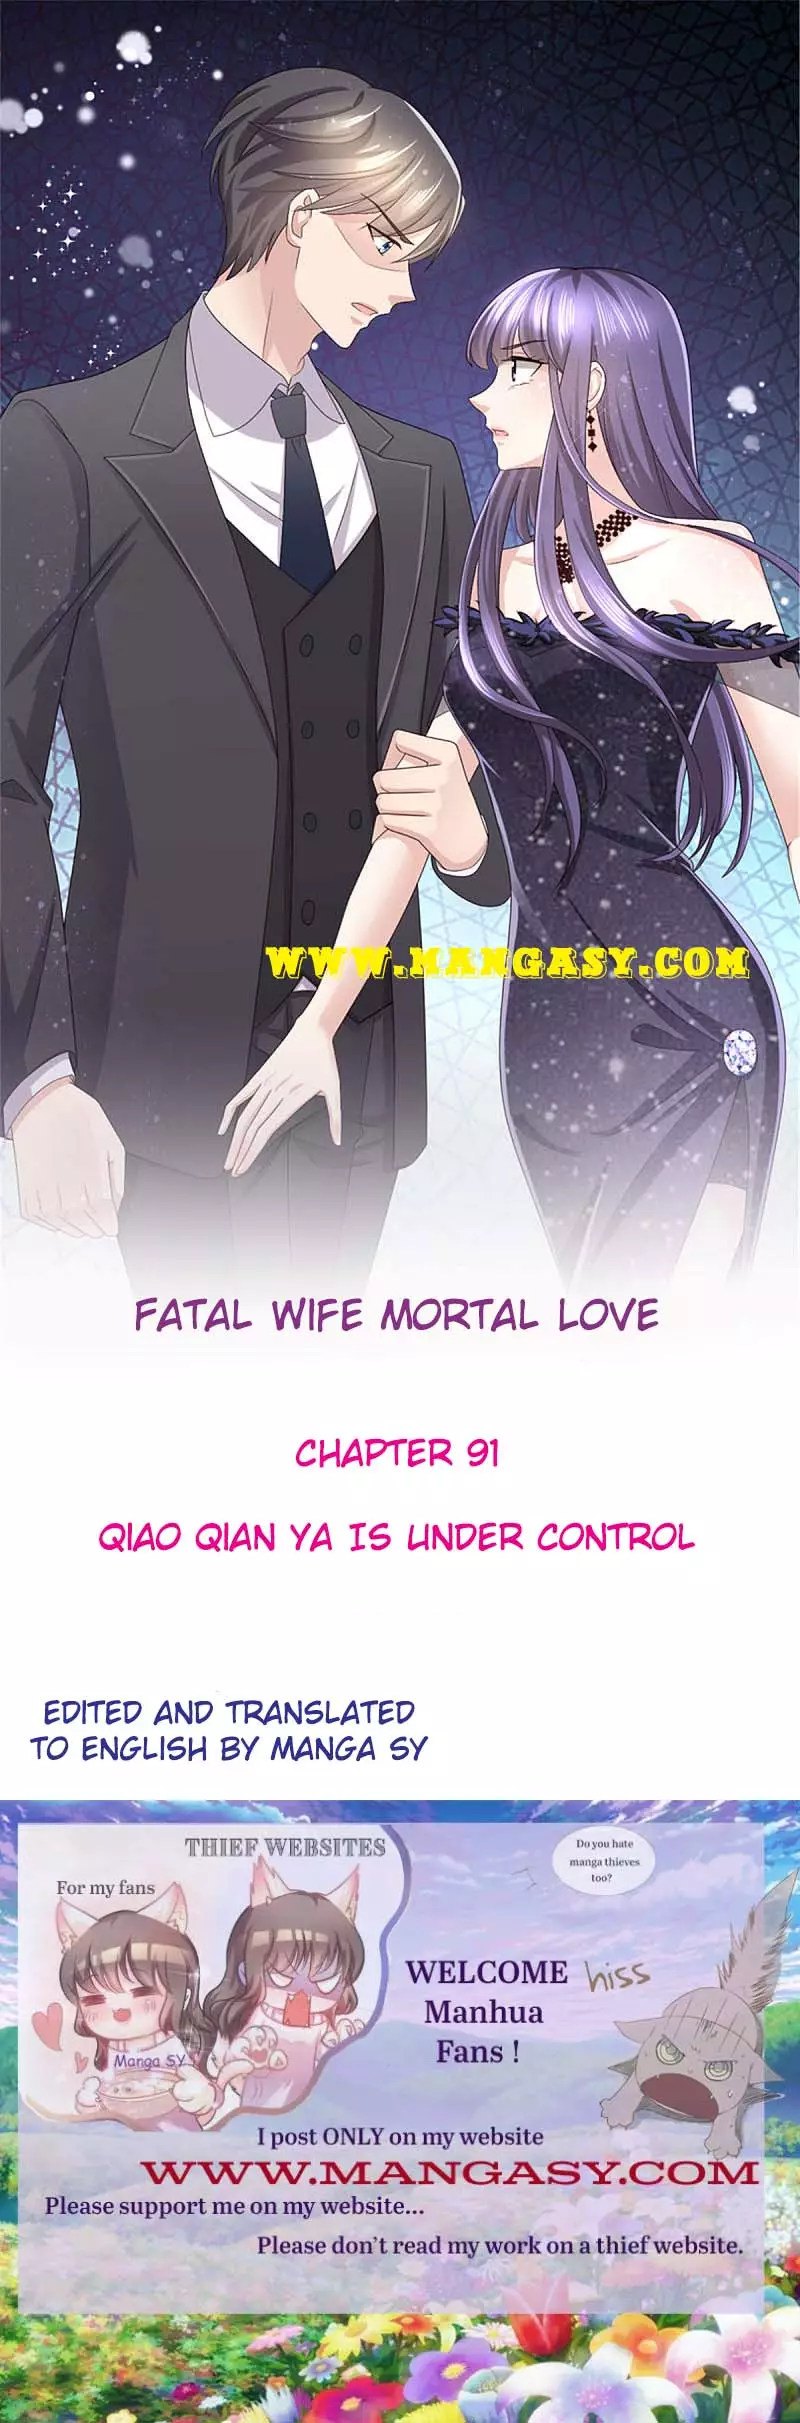 A Deadly Sexy Wife: The Ceo Wants To Remarry - 91 page 1-2280a8d8